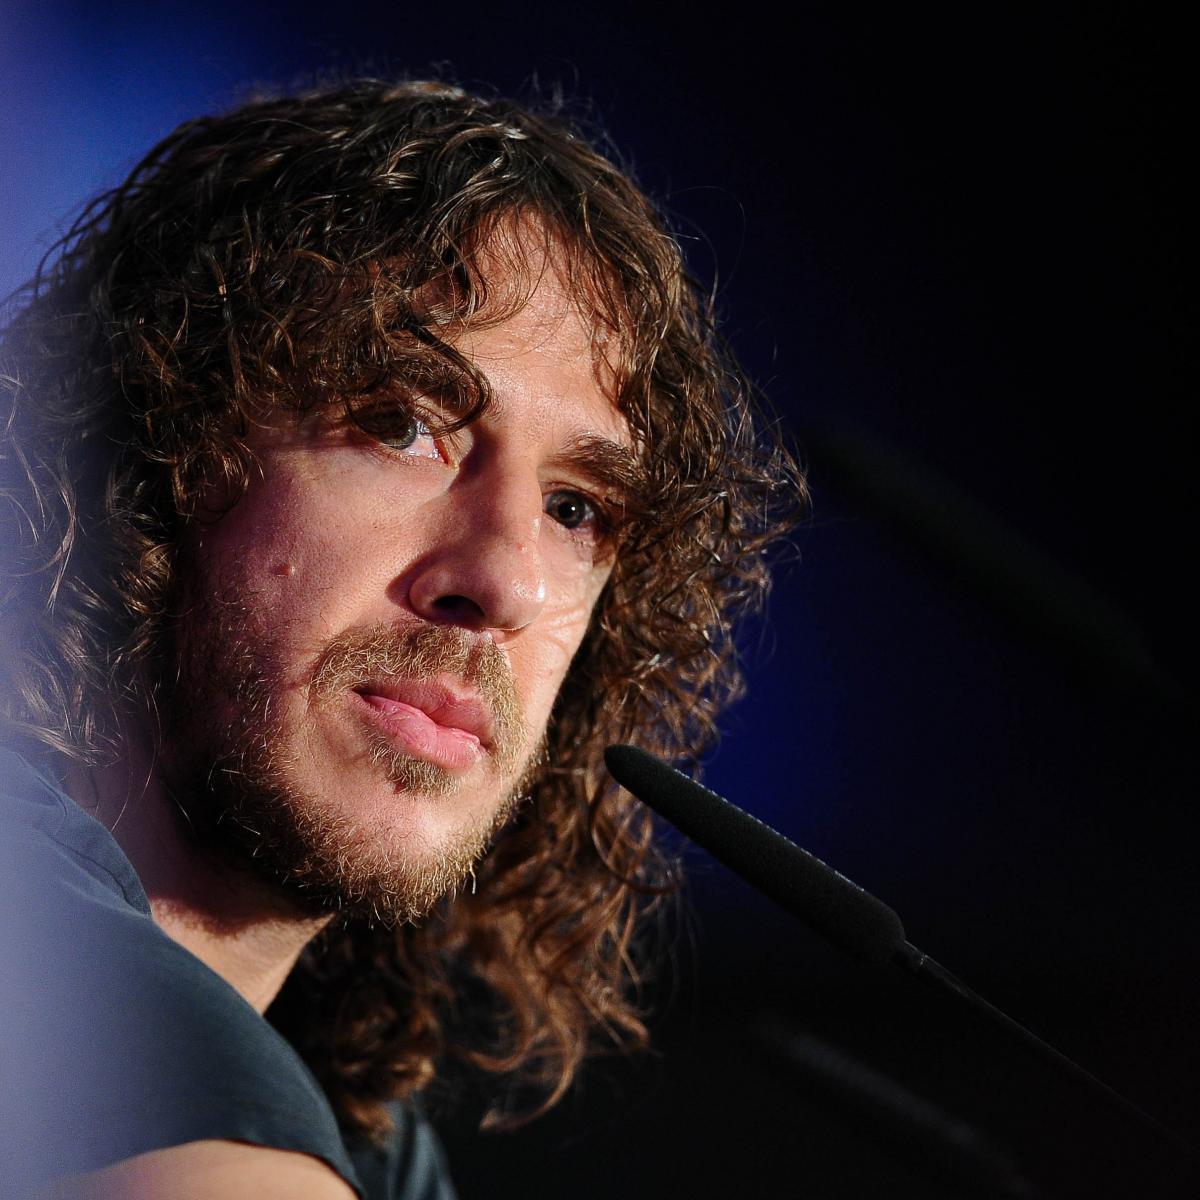 Carles Puyol Resigns from Barcelona: Latest Details, Comments and Reaction